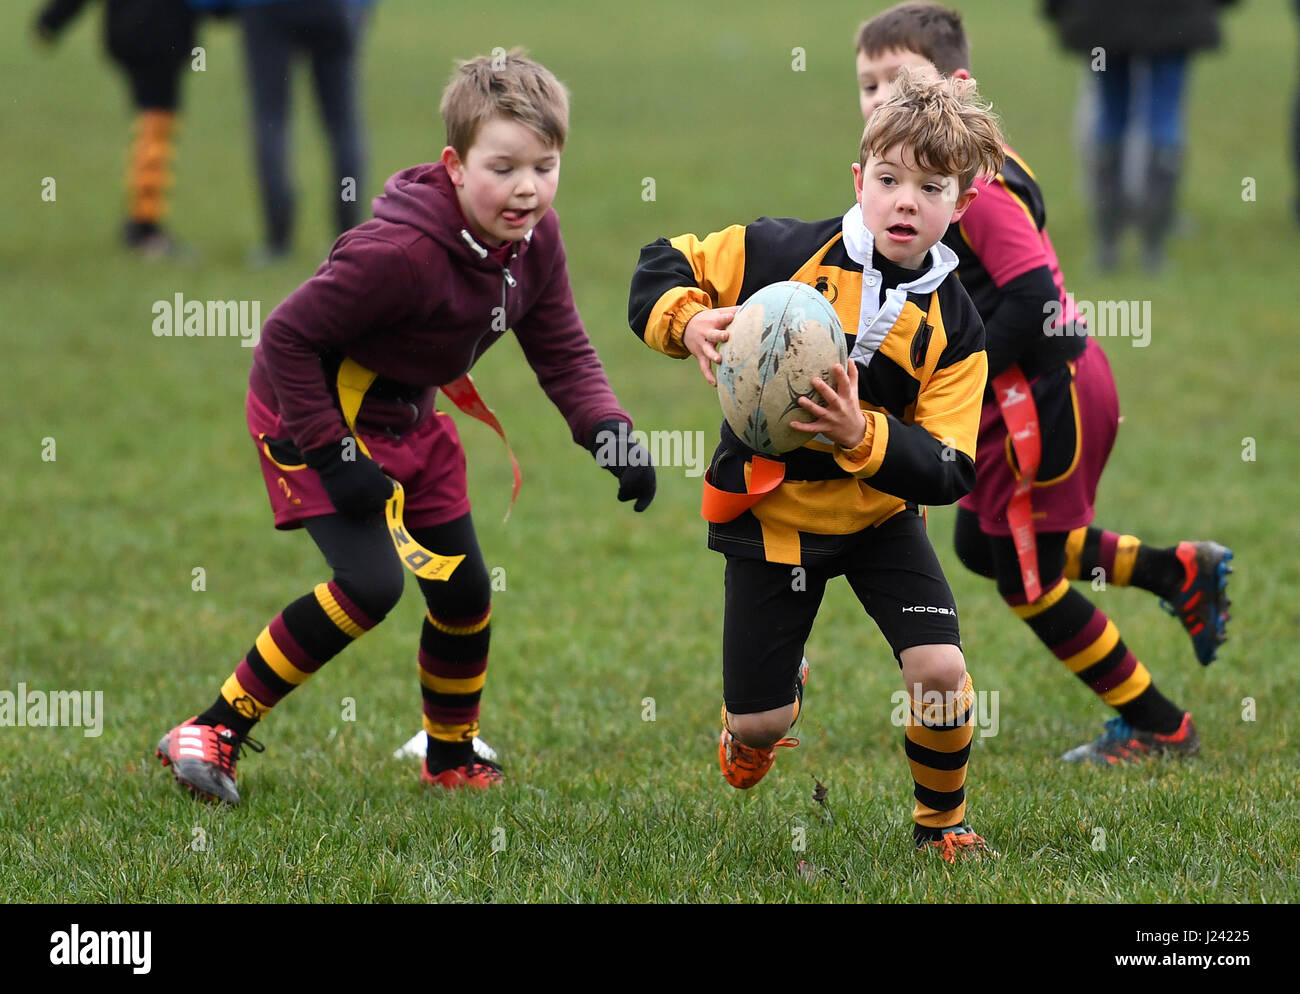 Childrens junior tag rugby action Britain Uk children childrens sport  healthy activity sport boys sports Stock Photo - Alamy